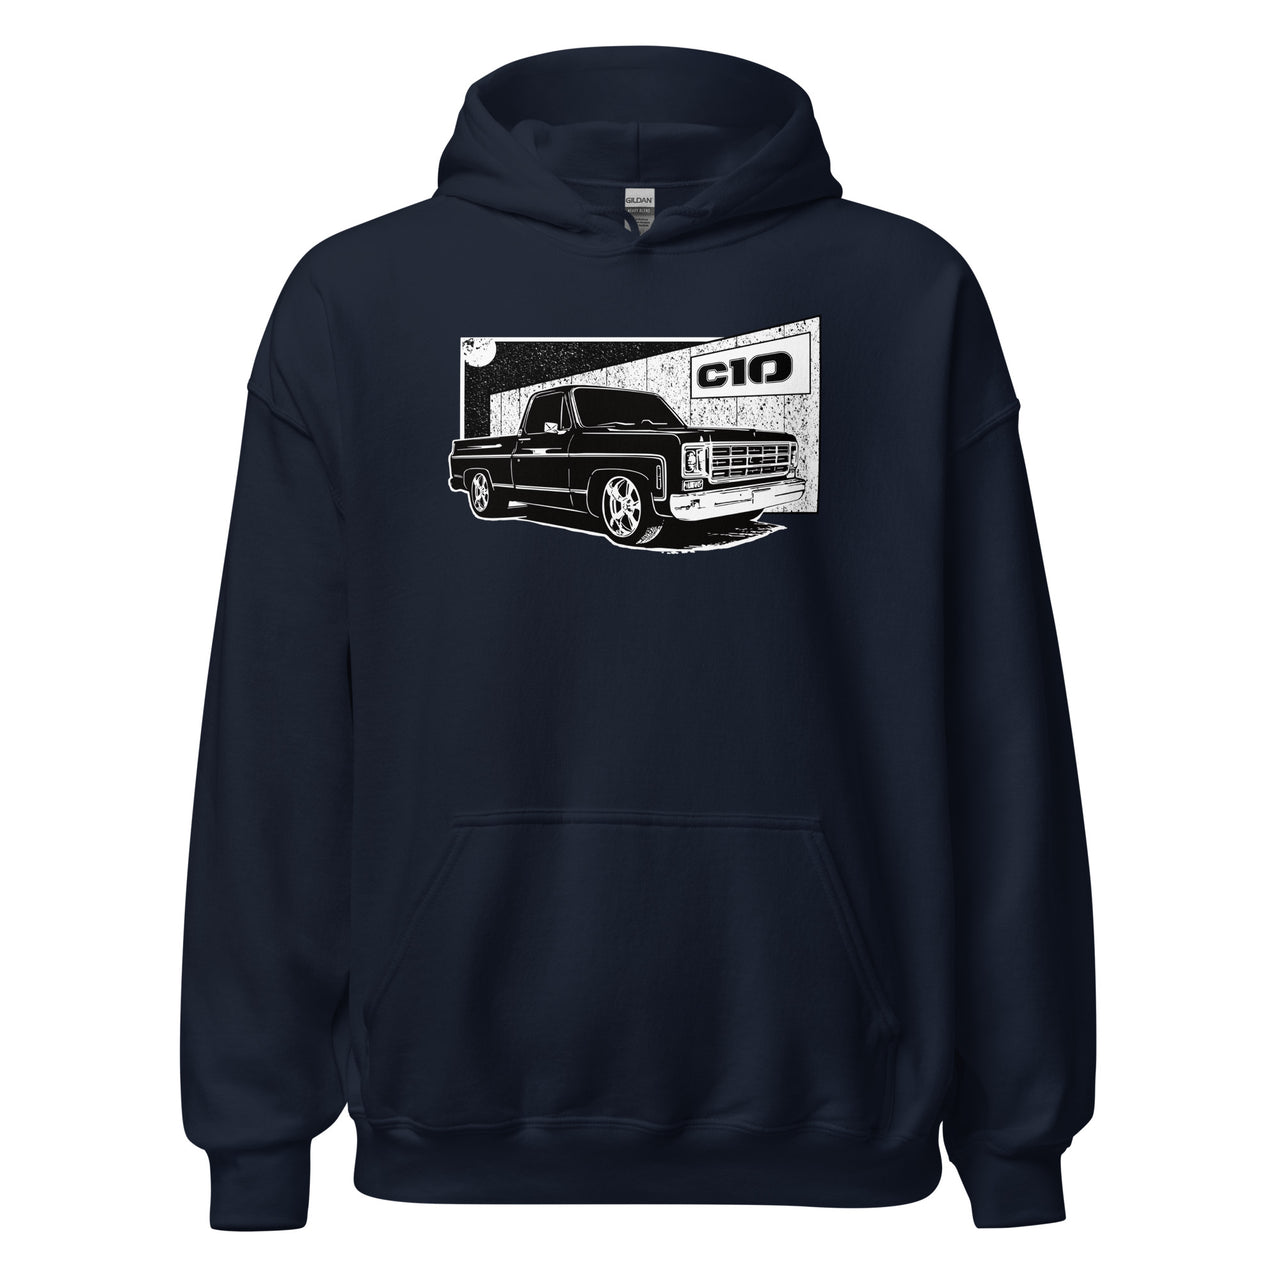 Square Body C10 Hoodie in navy